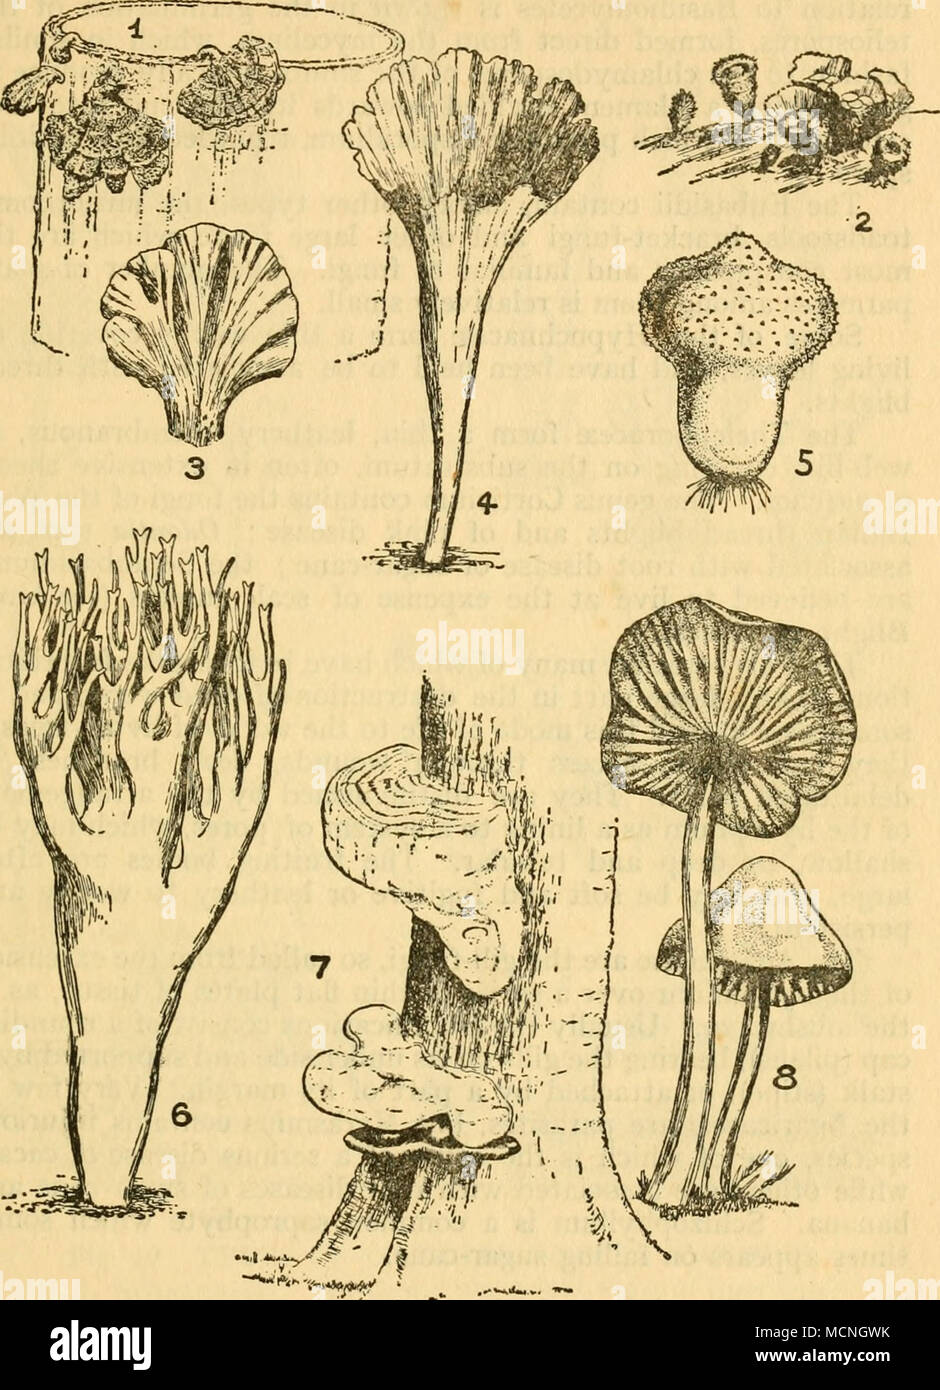 . Fig. 9 BASIDIOMYCETES 1. SCHIZOPHYLLUM CoMMUNE. 2. CyATHUS MiCROSPORUS. 3. Thelephora. 4. Craterellus. 5. Lycoperdon. 6. Lachnocladium. 7. Fomes. 8. Marasmius. 4, 5, 6, 8 after Nat. Pflanz are elongated and frequently join by a small cross filament to make pairs. Stock Photo